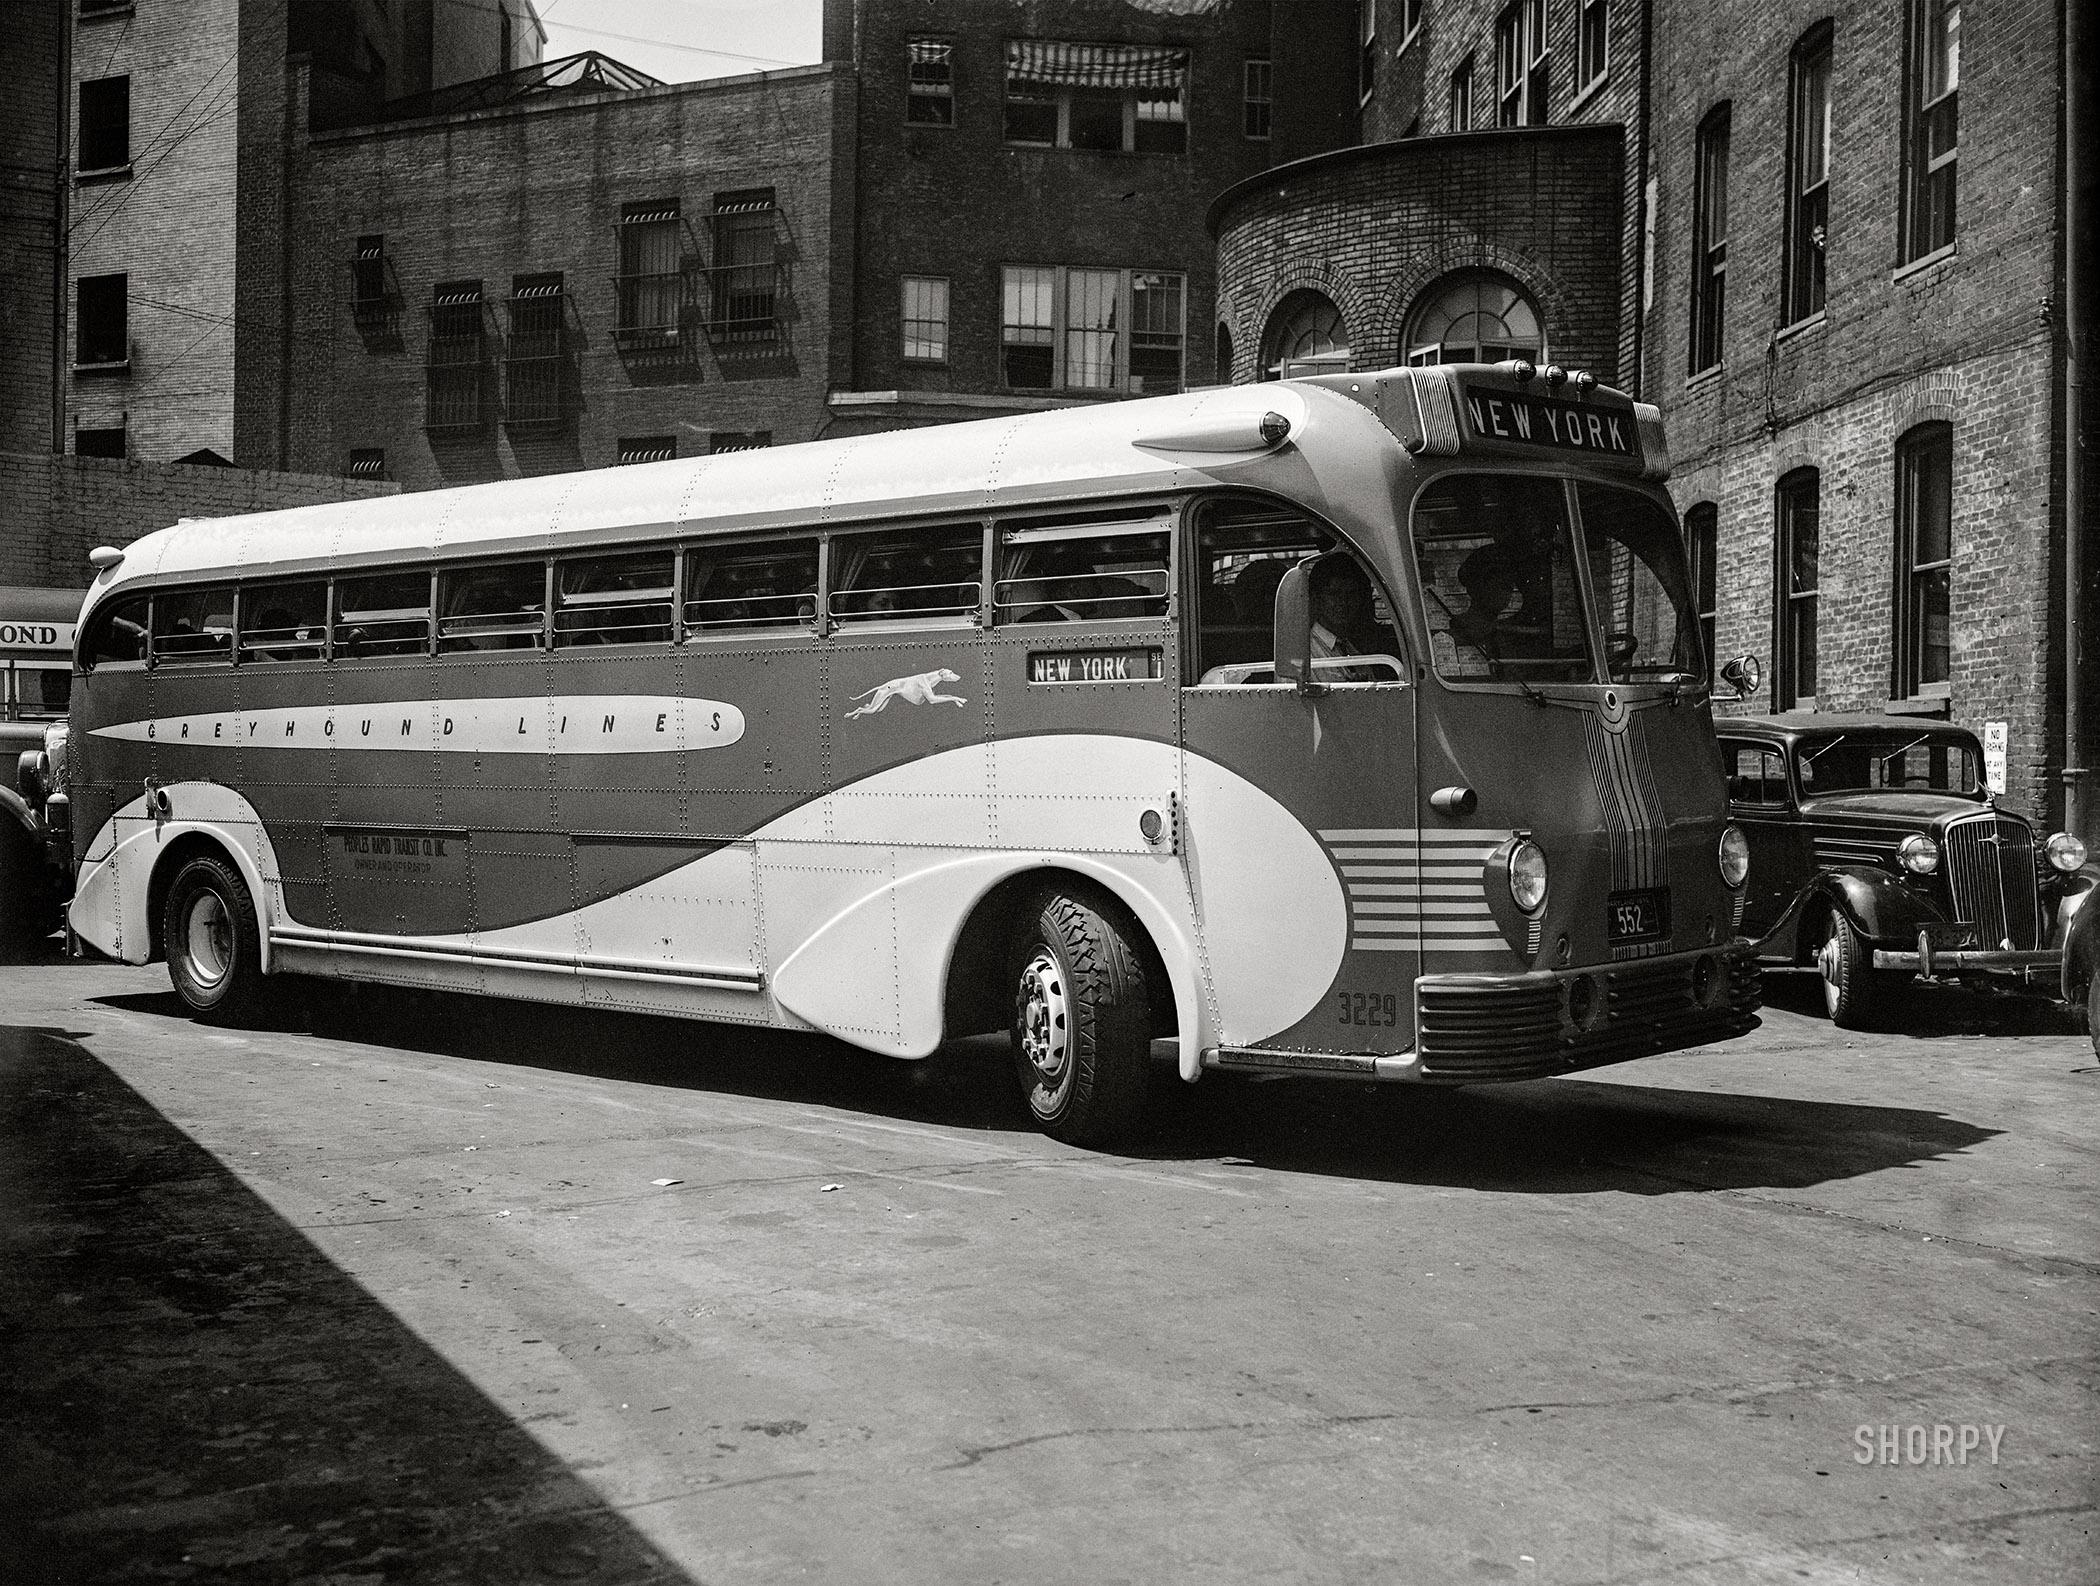 Washington, D.C., 1936. "Bus transportation -- Greyhound Lines motor coach to New York." 4x5 inch glass negative, Harris & Ewing Collection. View full size.